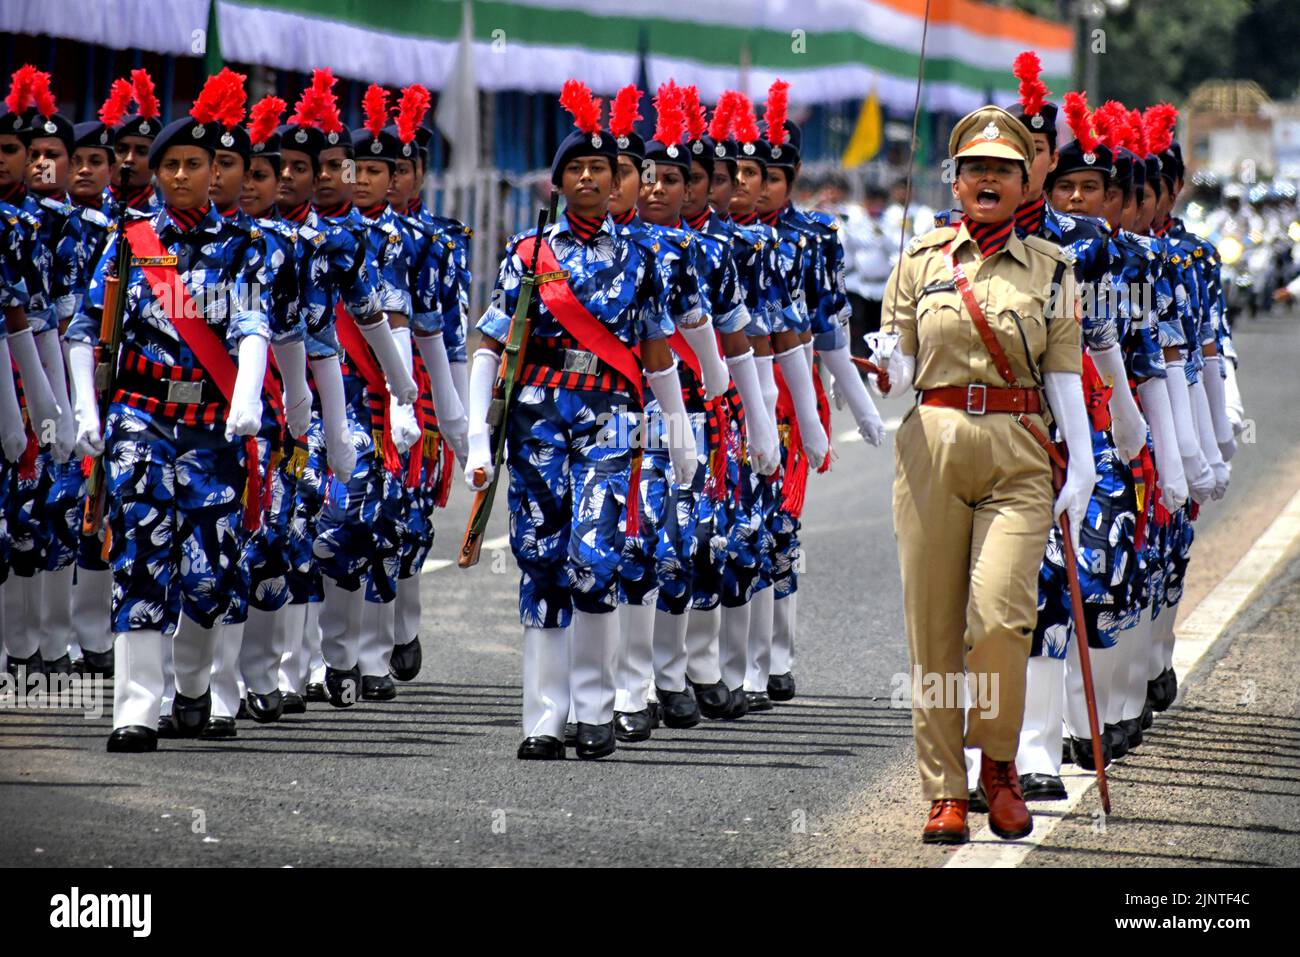 Rapid Action Force (RAF) Police women's Team seen practicing during the Independence day Final Dress Rehearsal. India prepares to celebrate the 75th Independence day on 15th August 2022 as part of the Azadi Ka Amrit Mahotsav celebration. Stock Photo